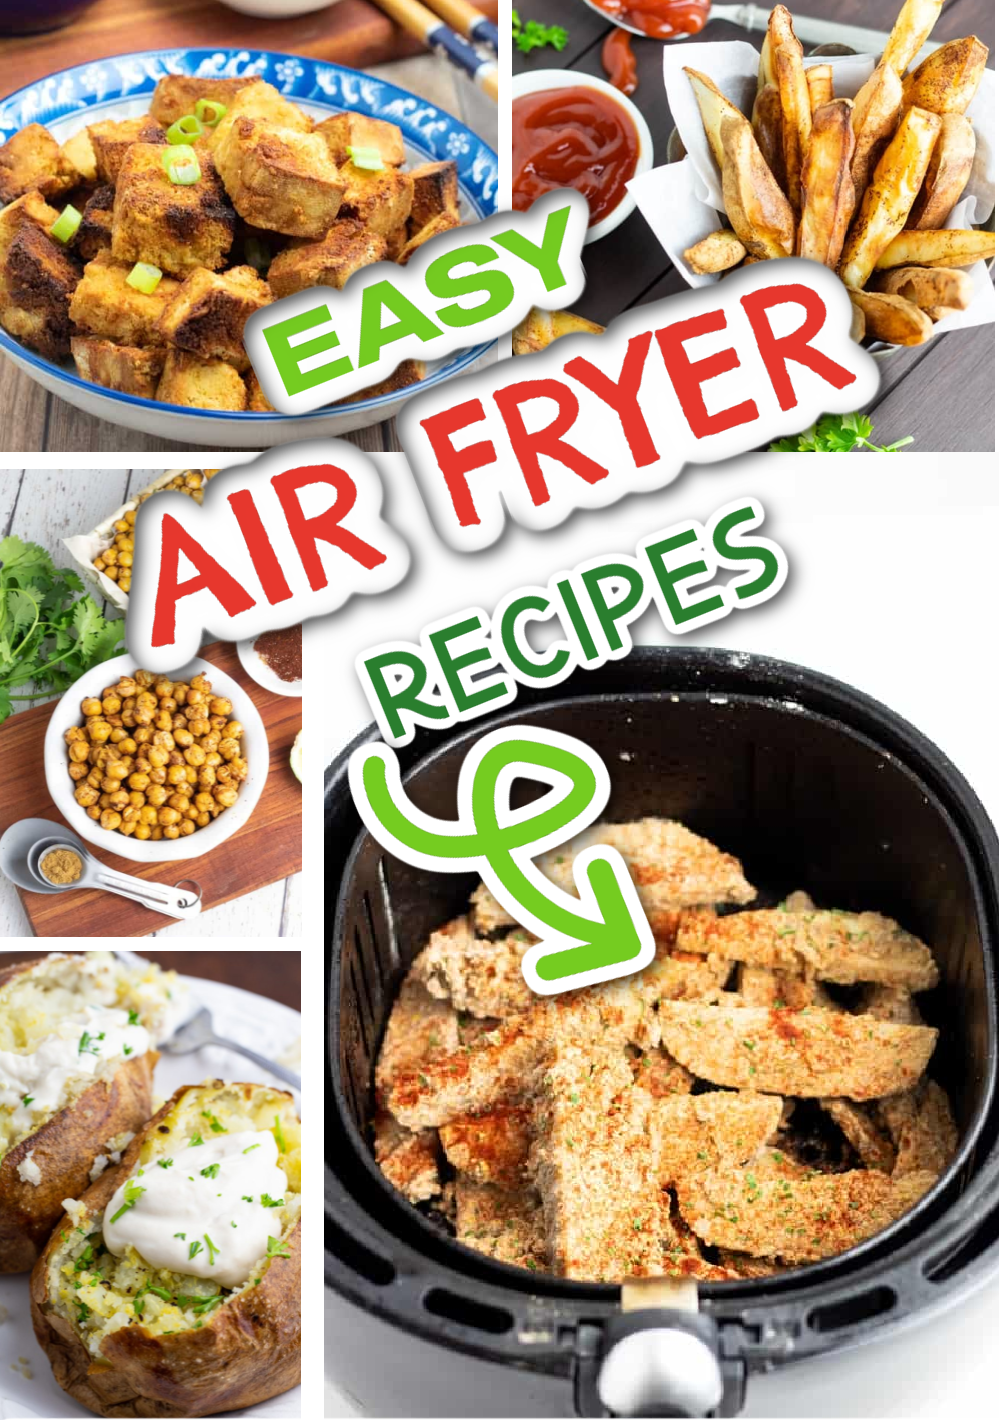 Air fryer recipes and tips